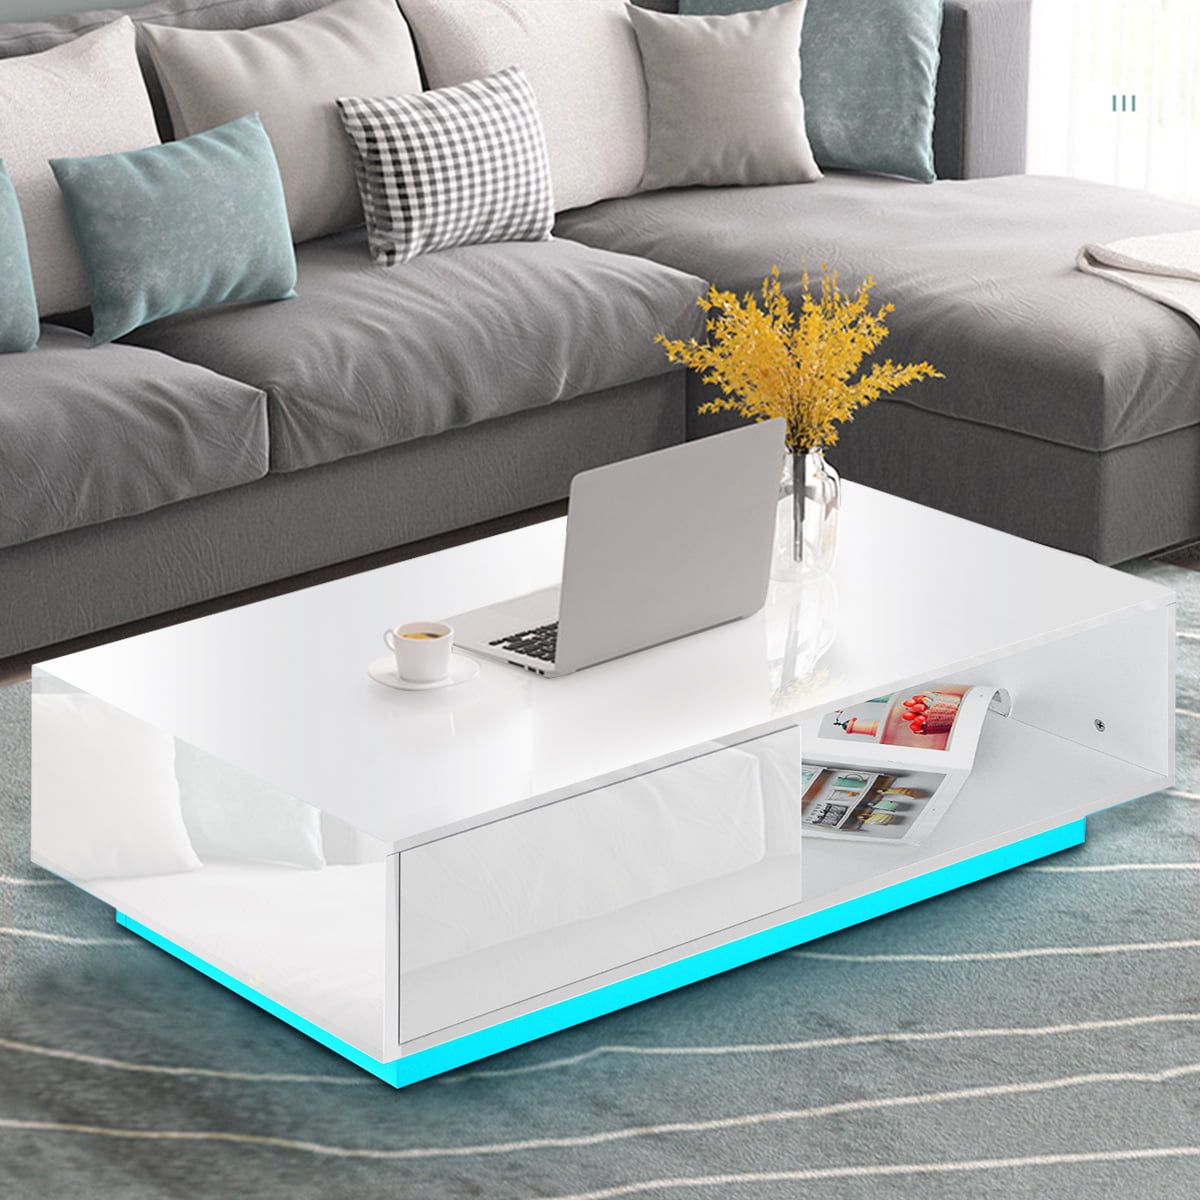 High Gloss Rgb Led Coffee Table With 2 Drawer Storage Modern Sofa Side Throughout Coffee Tables With Drawers And Led Lights (View 2 of 20)